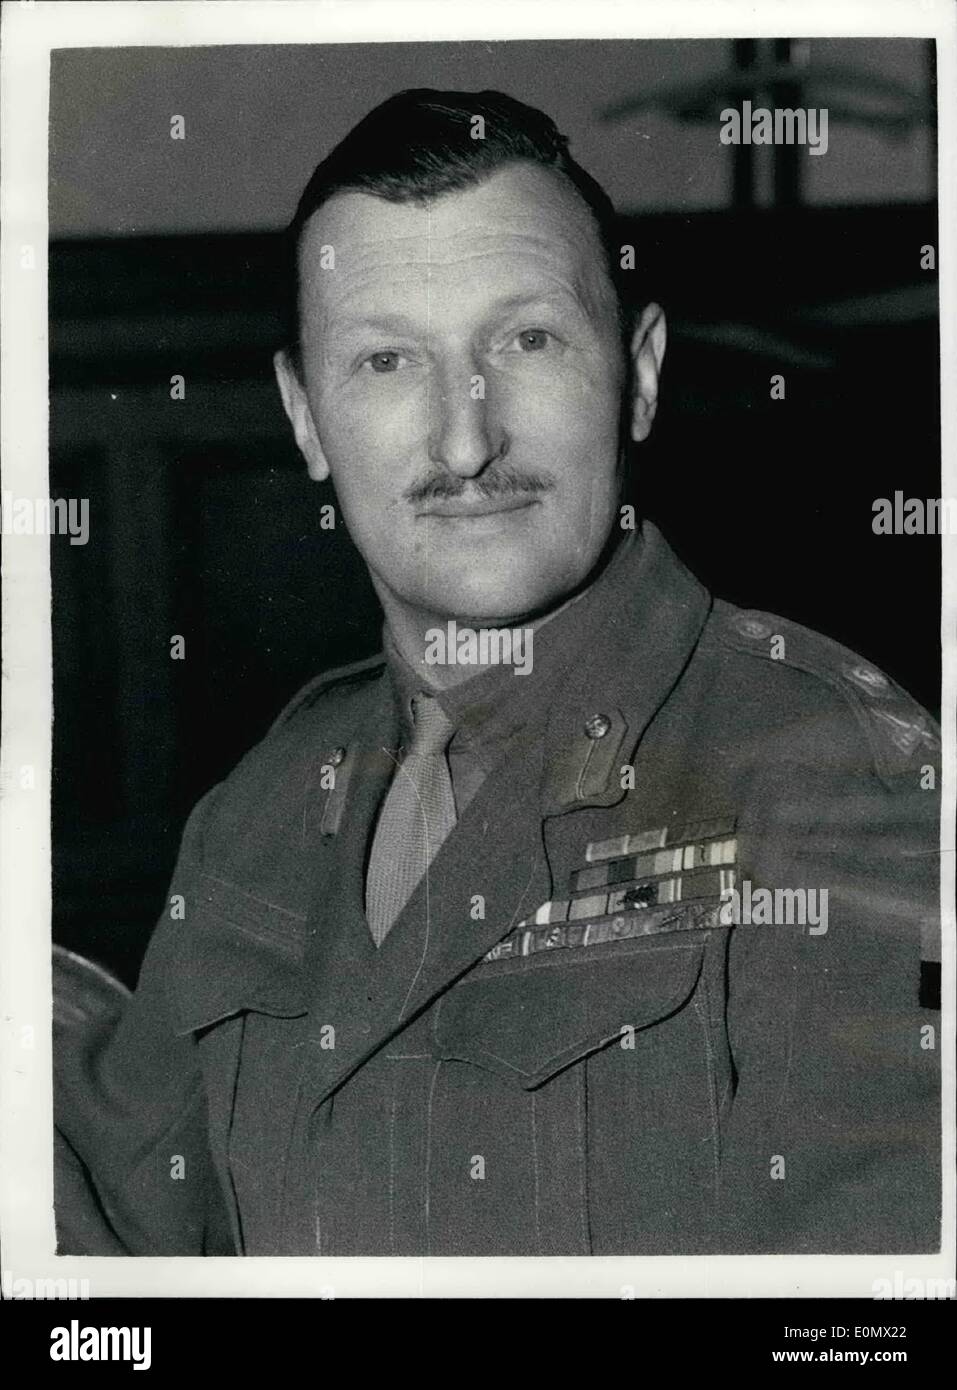 Oct. 10, 1956 - He Commands the Whole Operation in the middle East General Sir Charles Keightley.: In charge of the whole operations in the Middle East is 55 year old General Sir Charles Keightley, C. in C. Middle East Land Forces. Under his overall command are the warships - Commandos troops and R.A.F. Units - assembled in the area of Suez. Photo shows General Sir Charles Keightley. Stock Photo